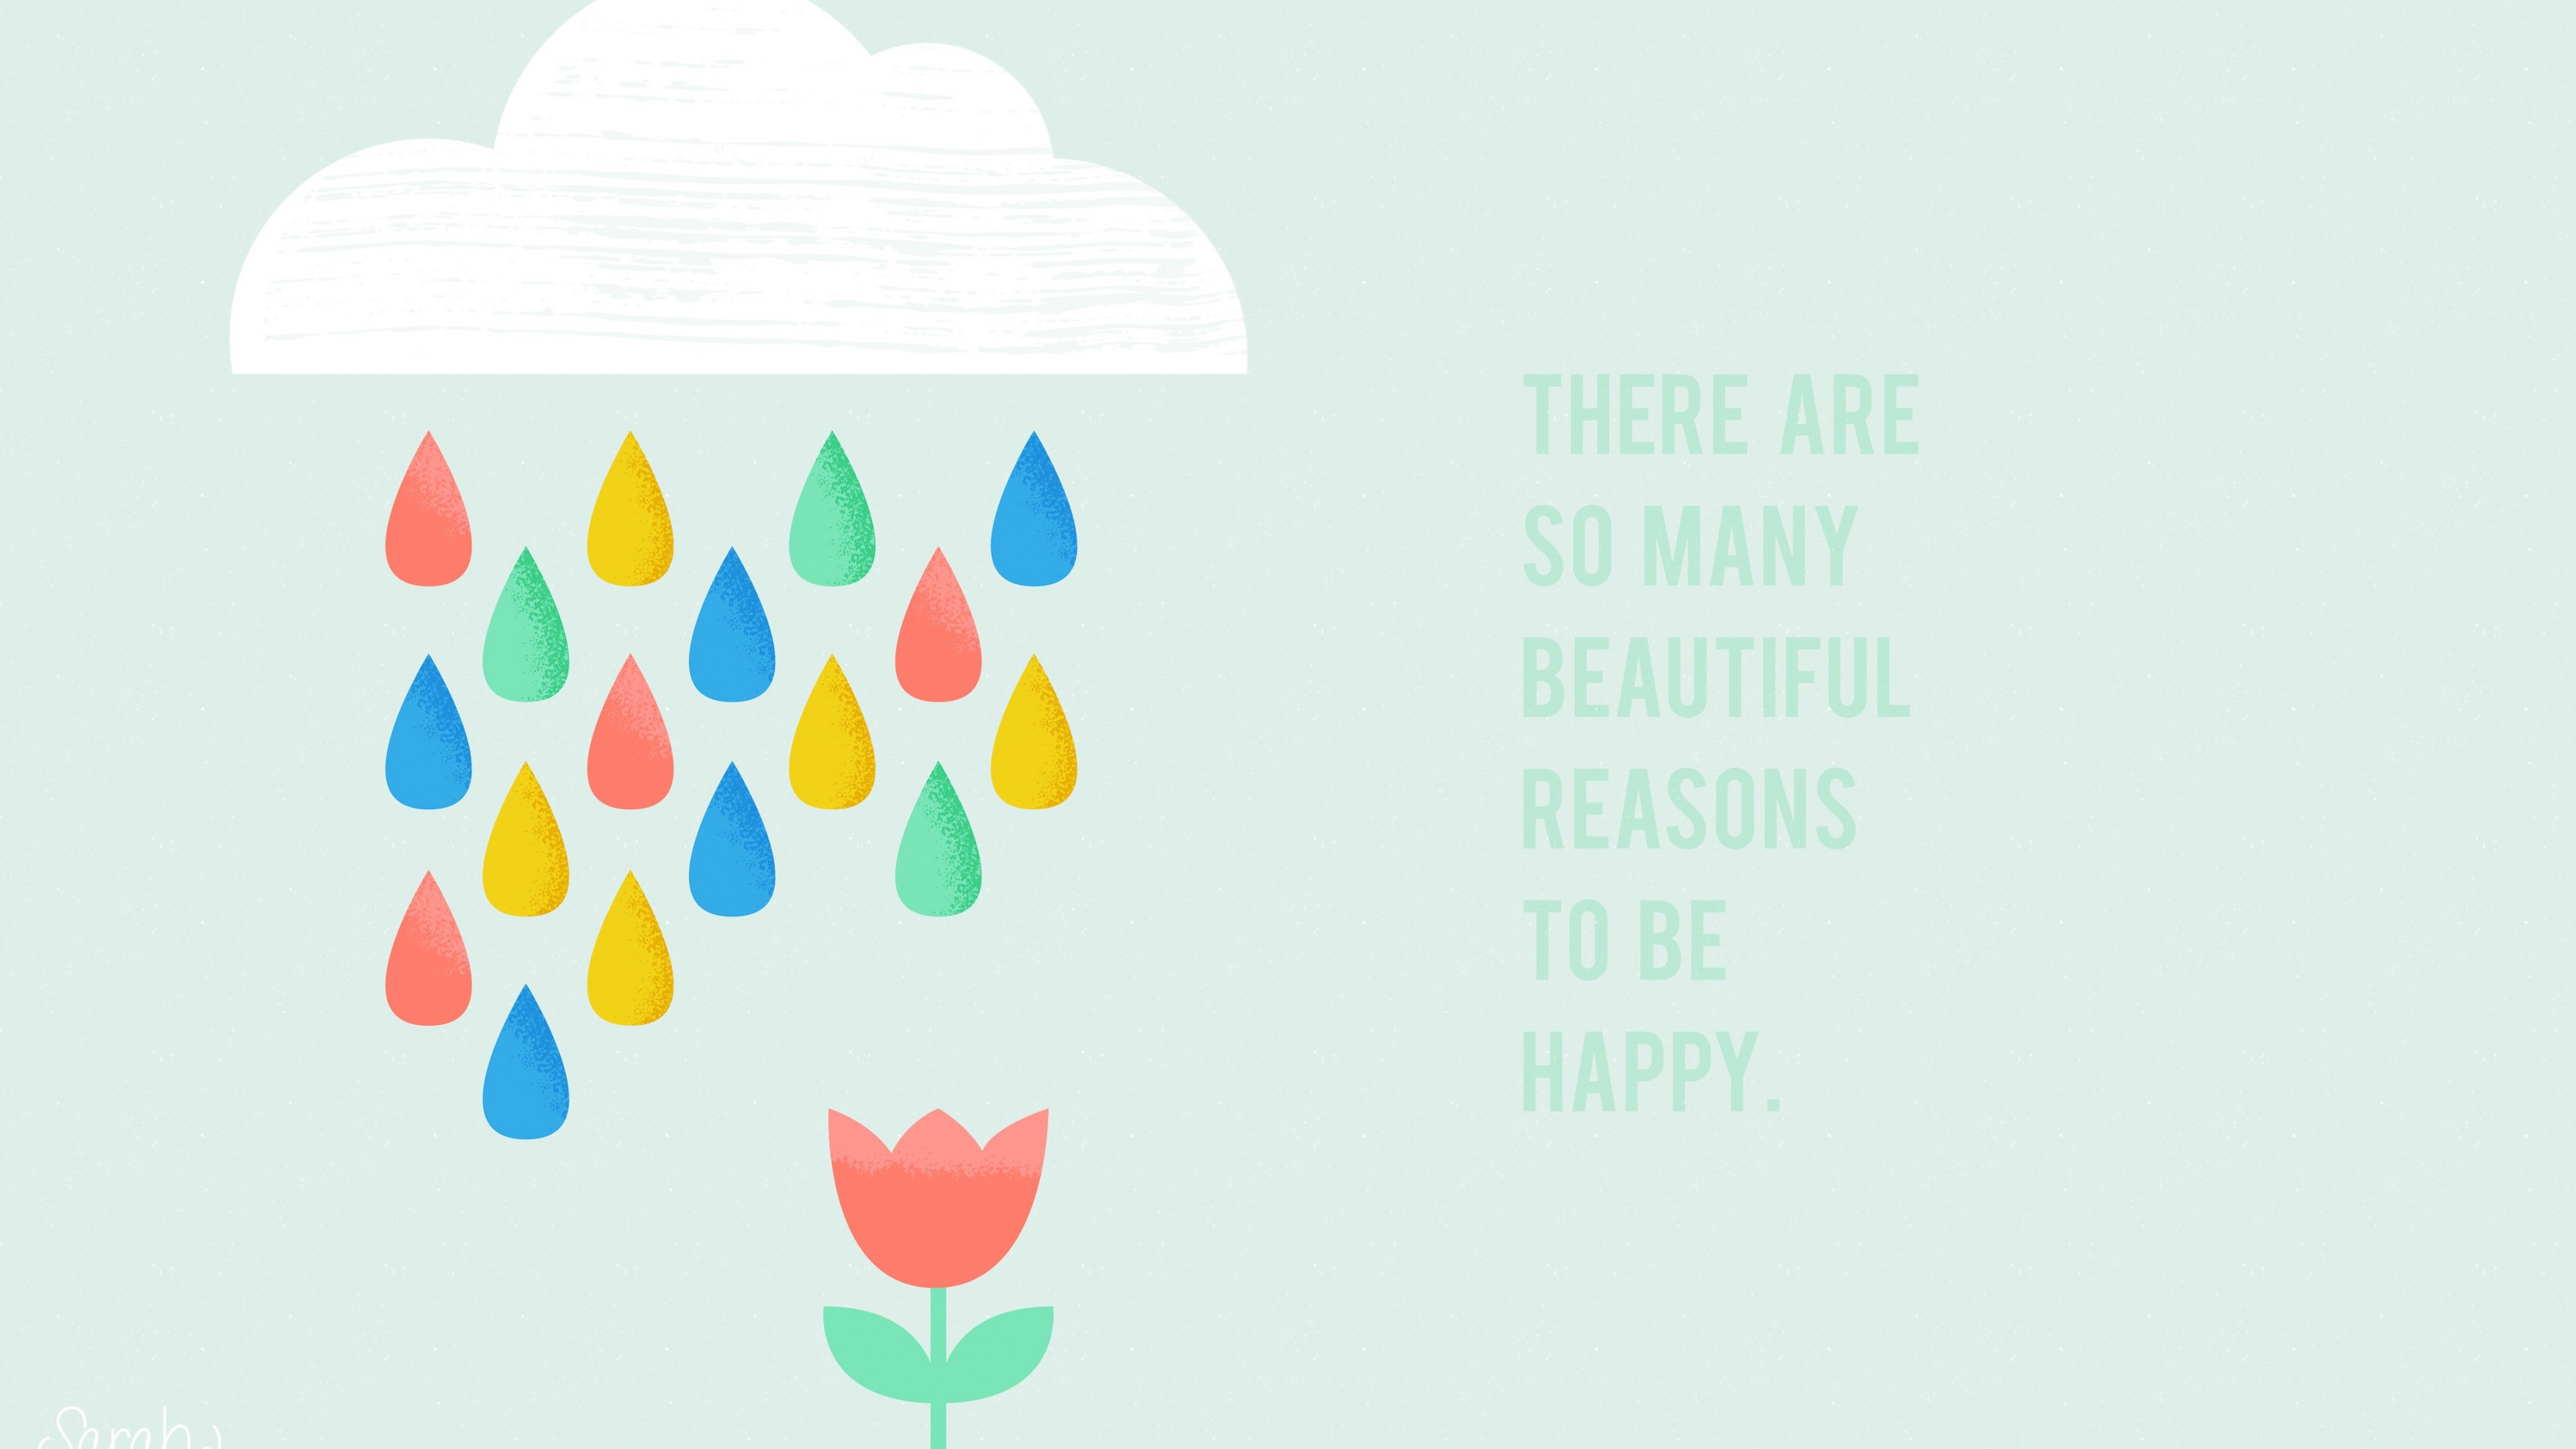 There are so many reasons to be happy Wallpaper for Desktop 4K 3840x2160